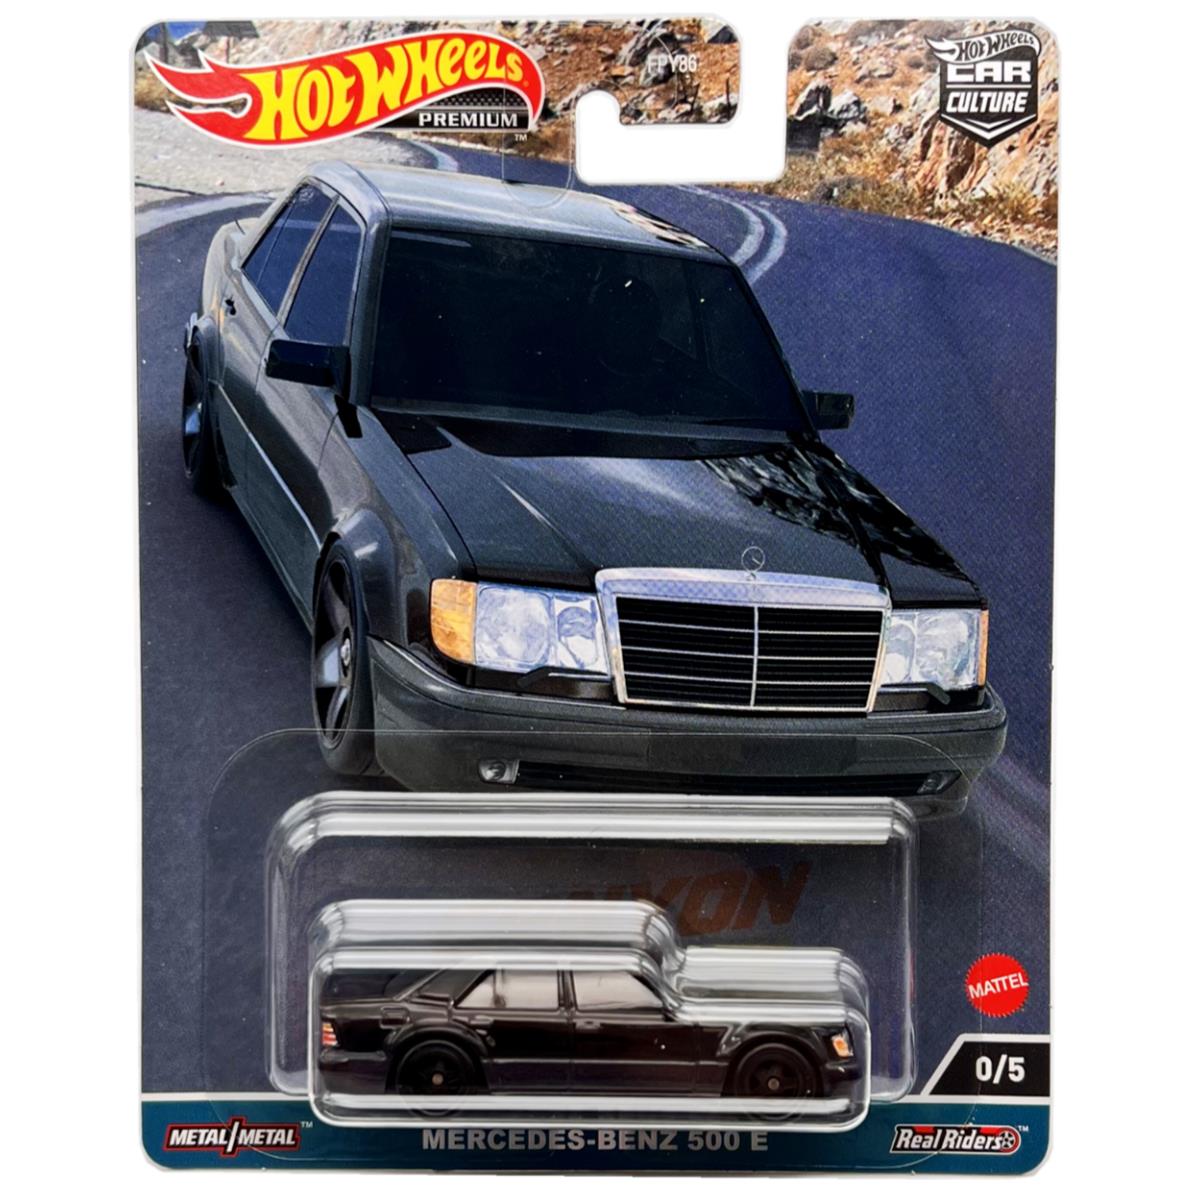 Hot Wheels 1:64 Canyion Warriors Mercedes-benz 500 E Black Chase Car